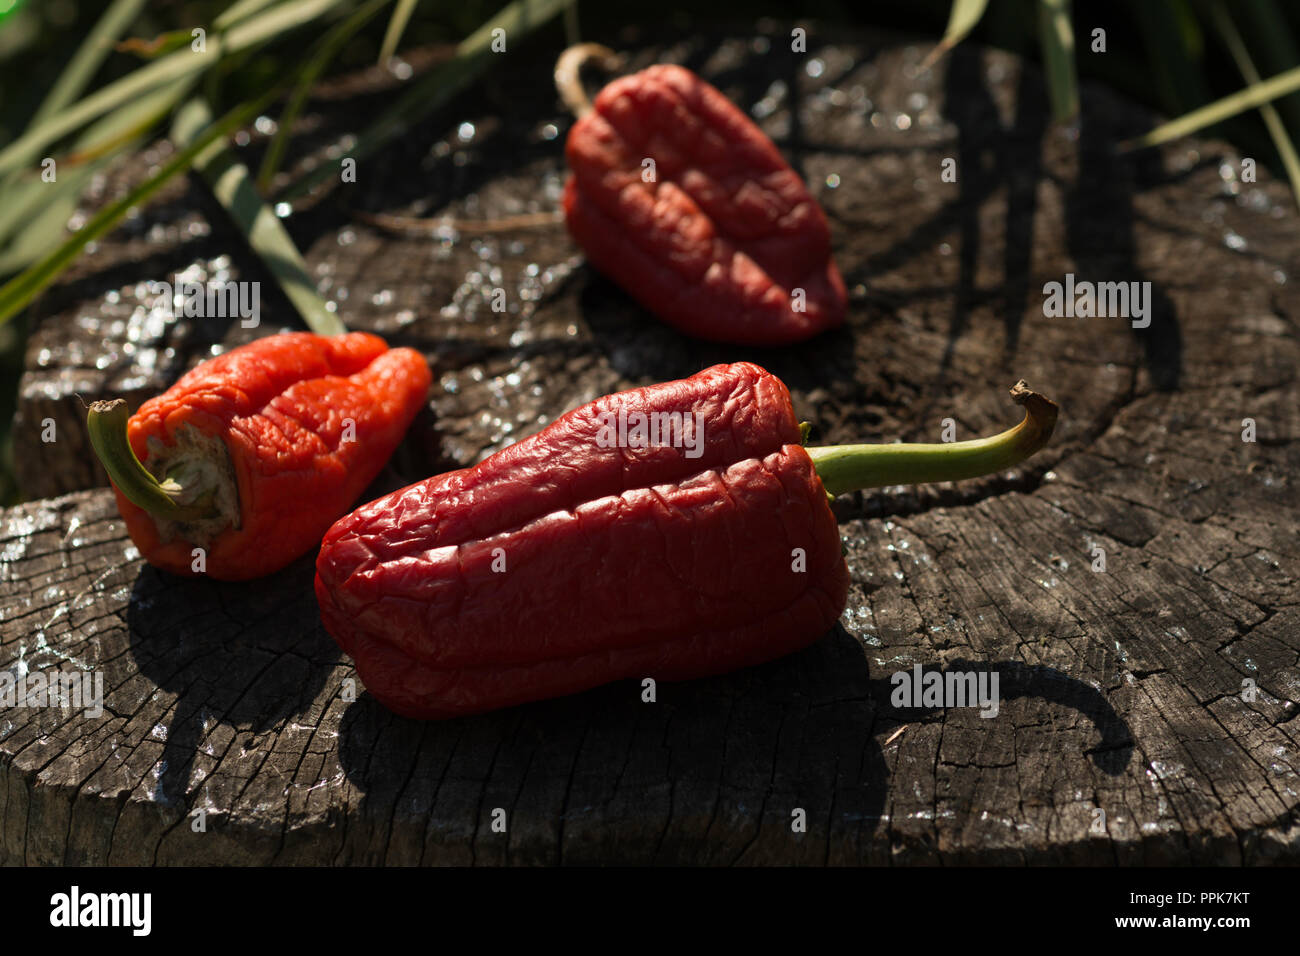 drying red bell peppers Stock Photo